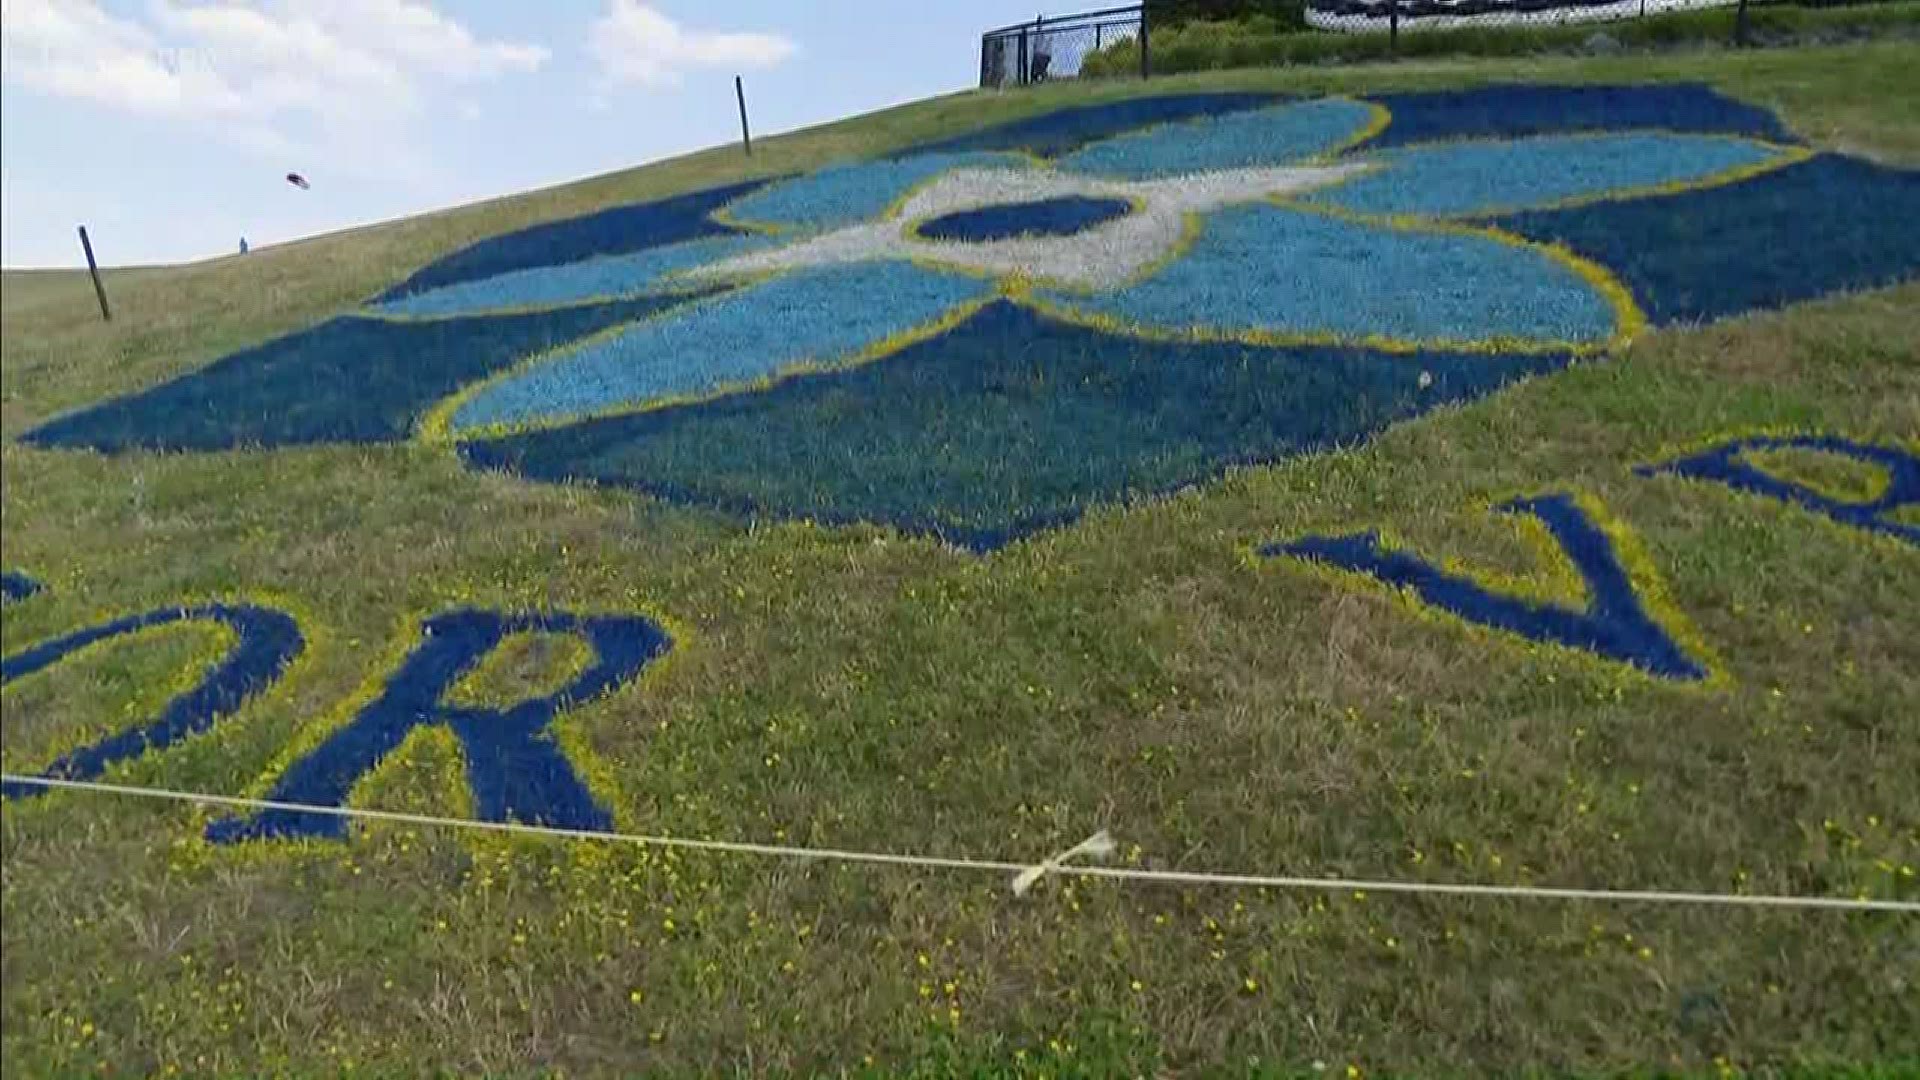 The forget-me-not symbol represents the victims who were hurt and killed in the city's mass shooting in May 2019.